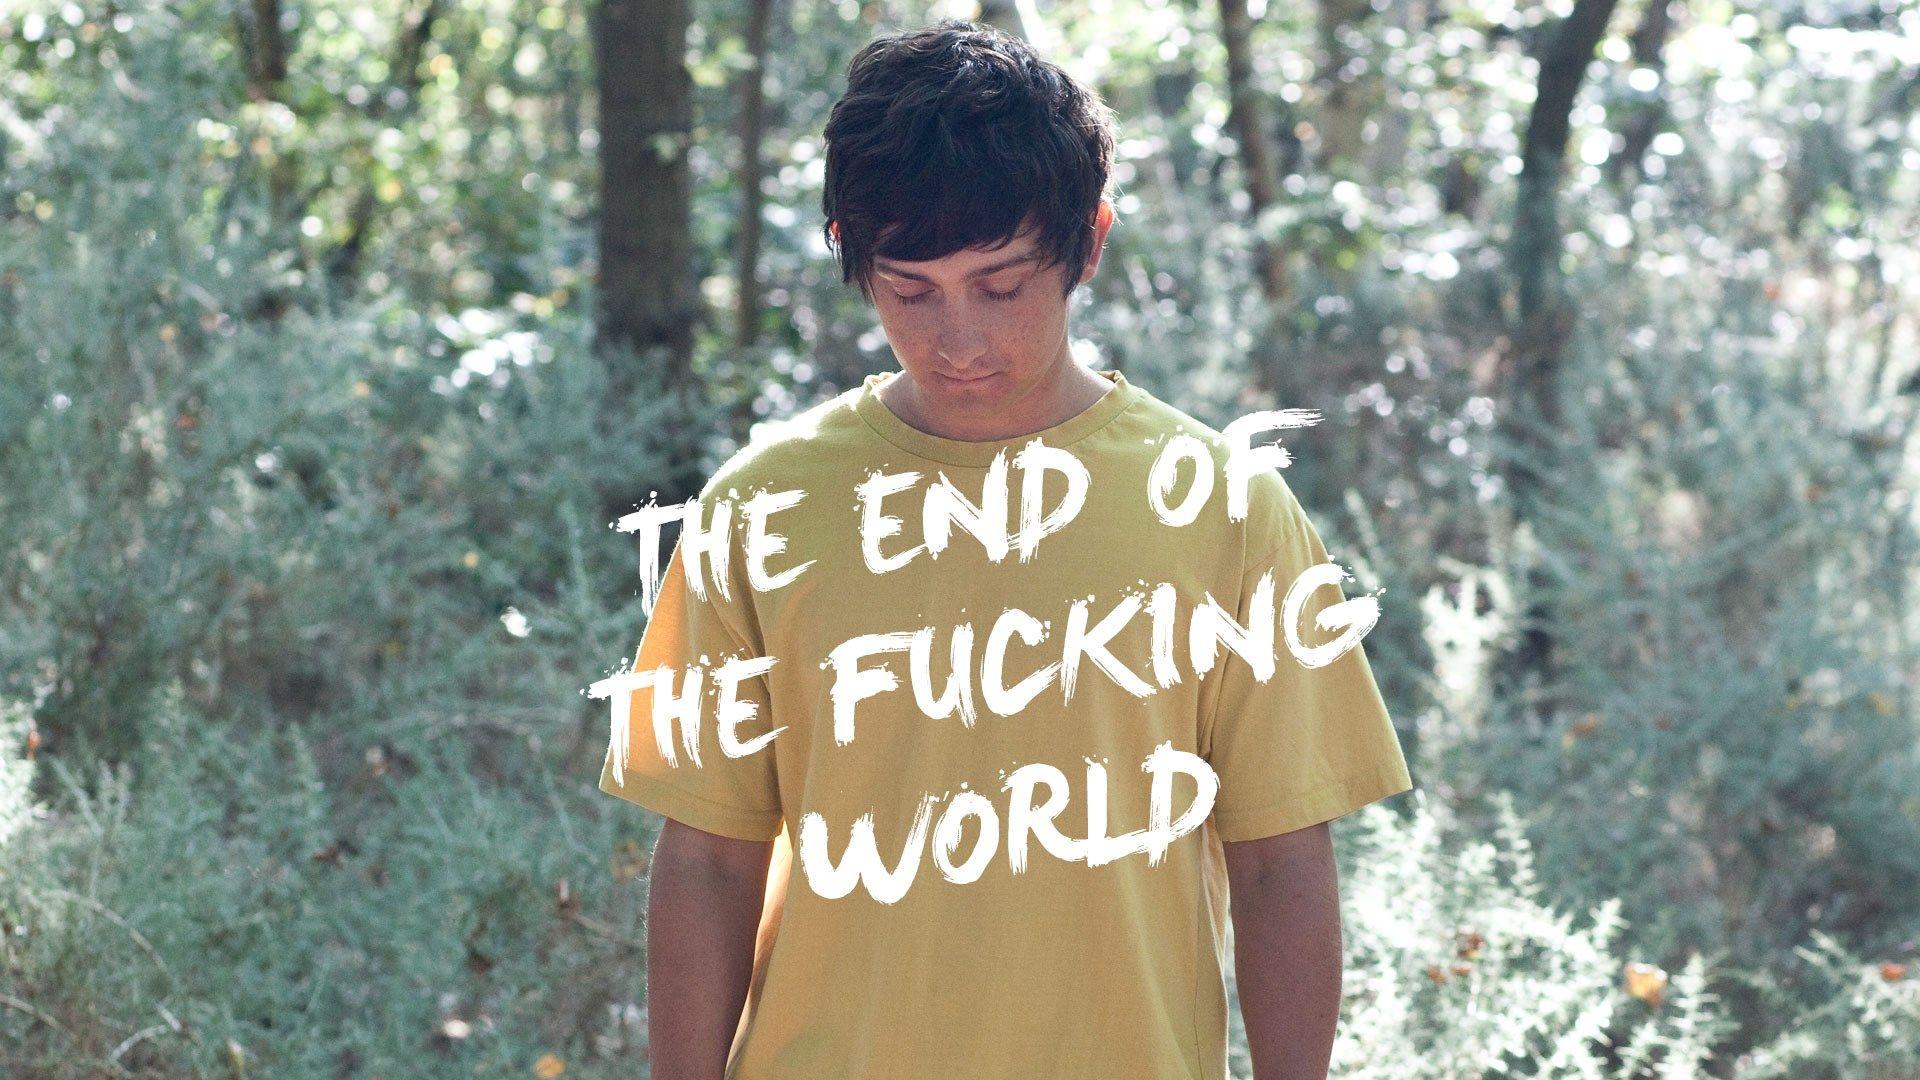 The End Of The F***ing World, The TV Series From Channel Based